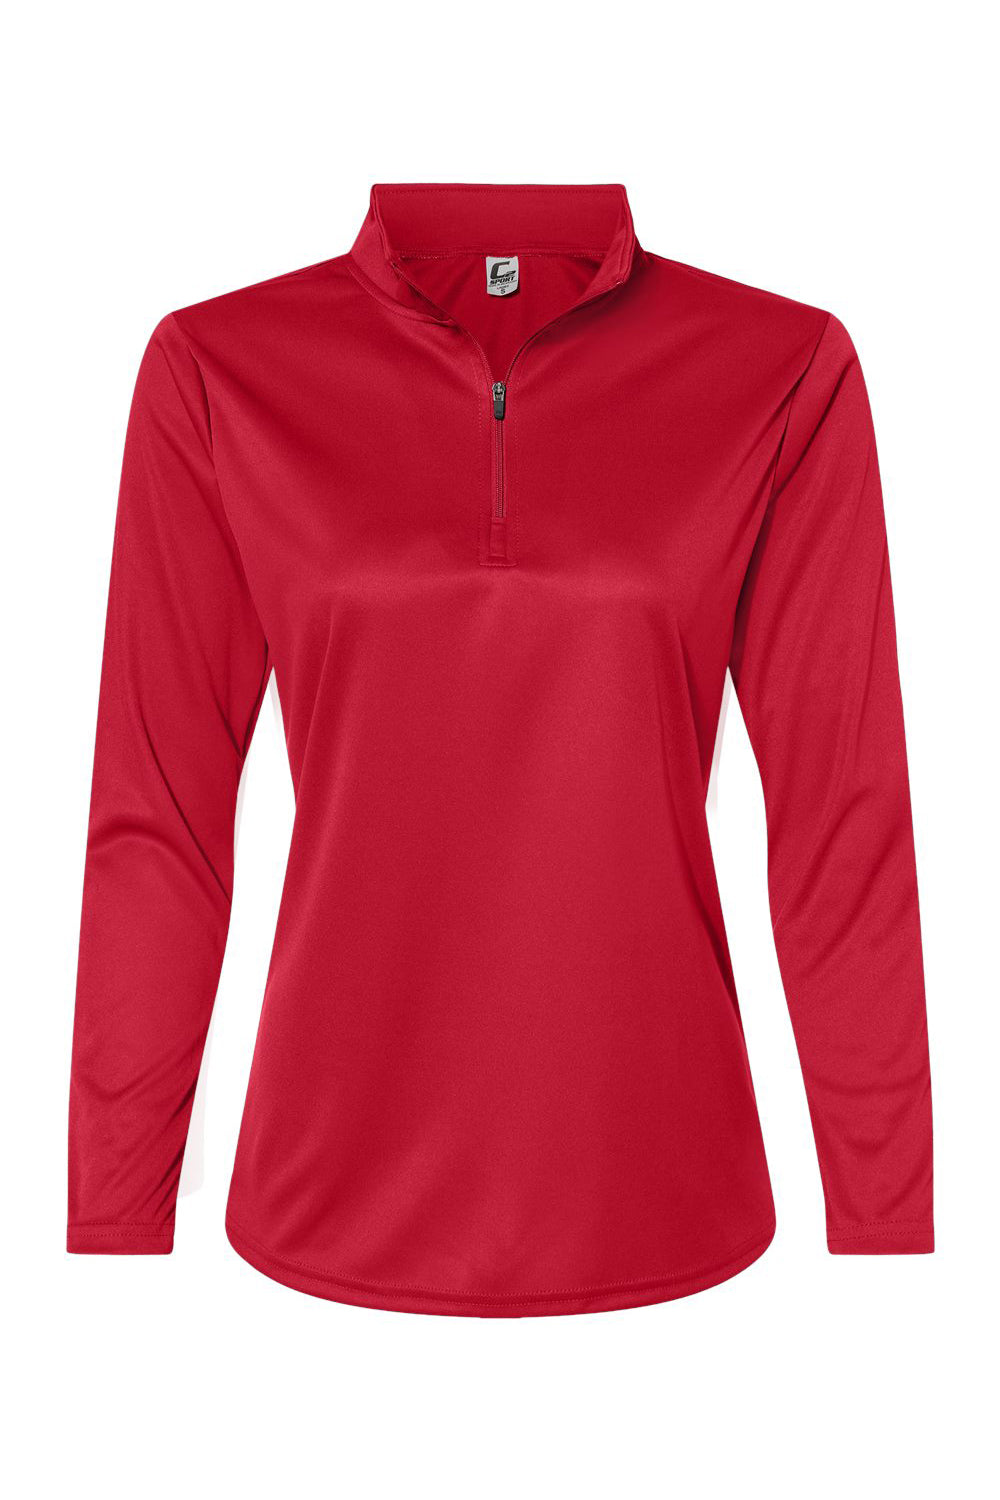 C2 Sport 5602 Womens Moisture Wicking 1/4 Zip Pullover Red Flat Front